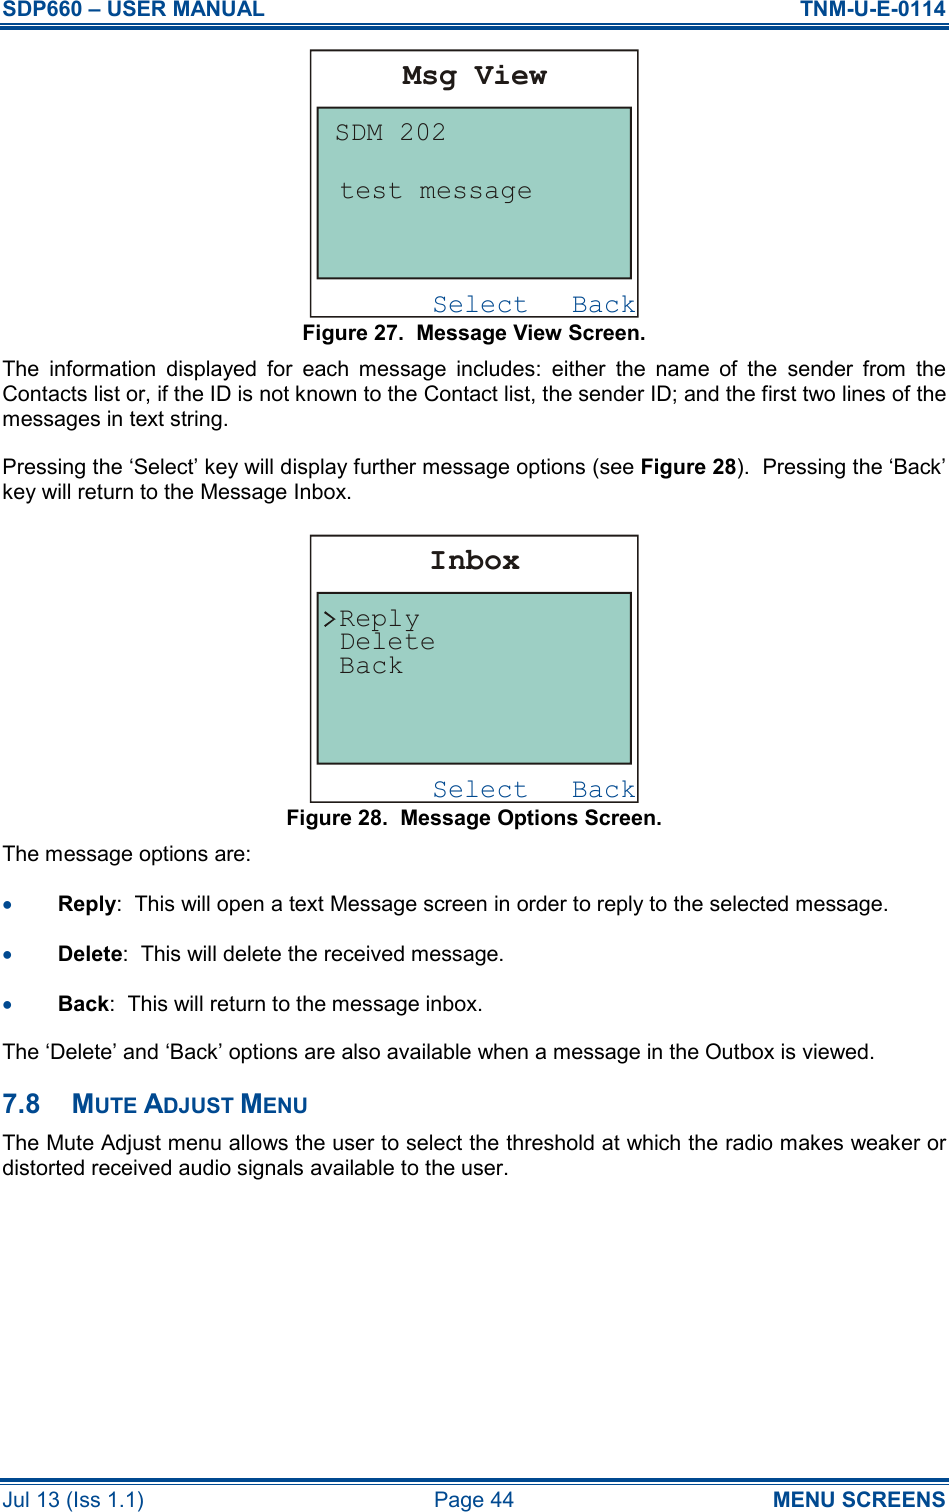 SDP660 – USER MANUAL  TNM-U-E-0114 Jul 13 (Iss 1.1)  Page 44  MENU SCREENS Figure 27.  Message View Screen. The  information  displayed  for  each  message  includes:  either  the  name  of  the  sender  from  the Contacts list or, if the ID is not known to the Contact list, the sender ID; and the first two lines of the messages in text string. Pressing the ‘Select’ key will display further message options (see Figure 28).  Pressing the ‘Back’ key will return to the Message Inbox. Figure 28.  Message Options Screen. The message options are: •  Reply:  This will open a text Message screen in order to reply to the selected message. •  Delete:  This will delete the received message. •  Back:  This will return to the message inbox. The ‘Delete’ and ‘Back’ options are also available when a message in the Outbox is viewed. 7.8  MUTE ADJUST MENU The Mute Adjust menu allows the user to select the threshold at which the radio makes weaker or distorted received audio signals available to the user. BackSelectMsg ViewSDM 202test messageBackSelectInboxBackReplyDelete